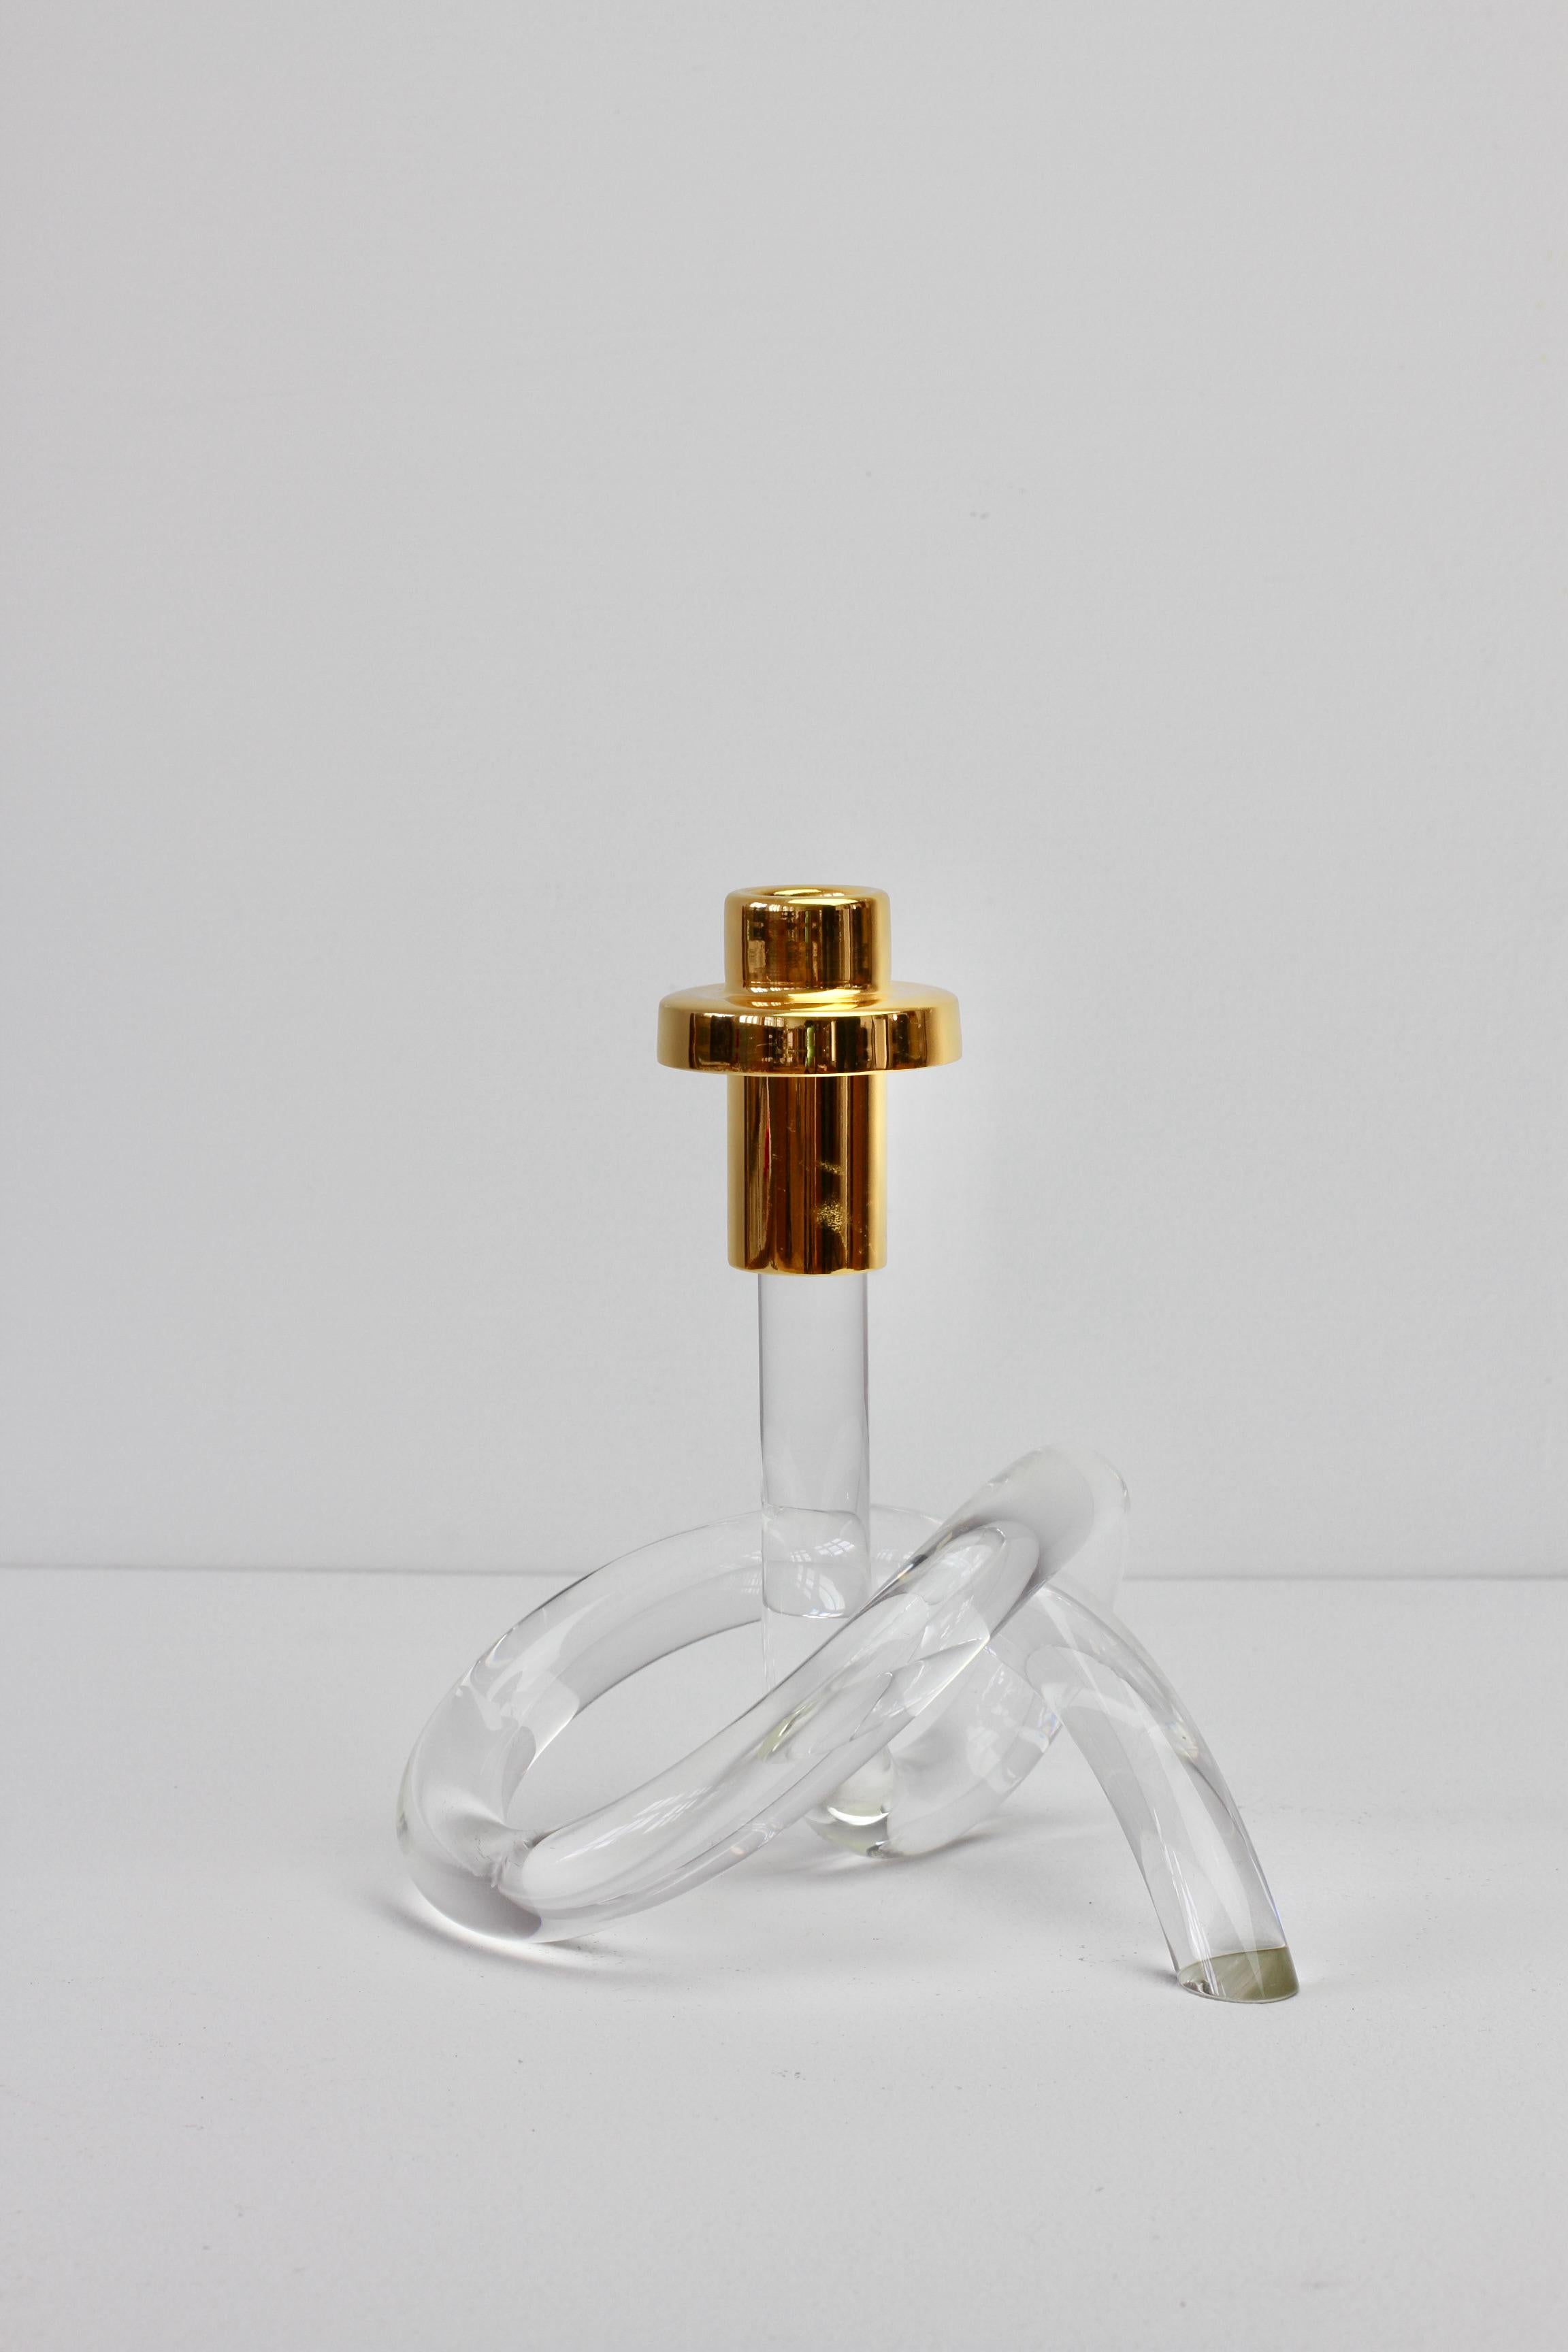 Gold and Lucite Twisted Pretzel Candlestick Holder/Candelabra by Dorothy Thorpe For Sale 8